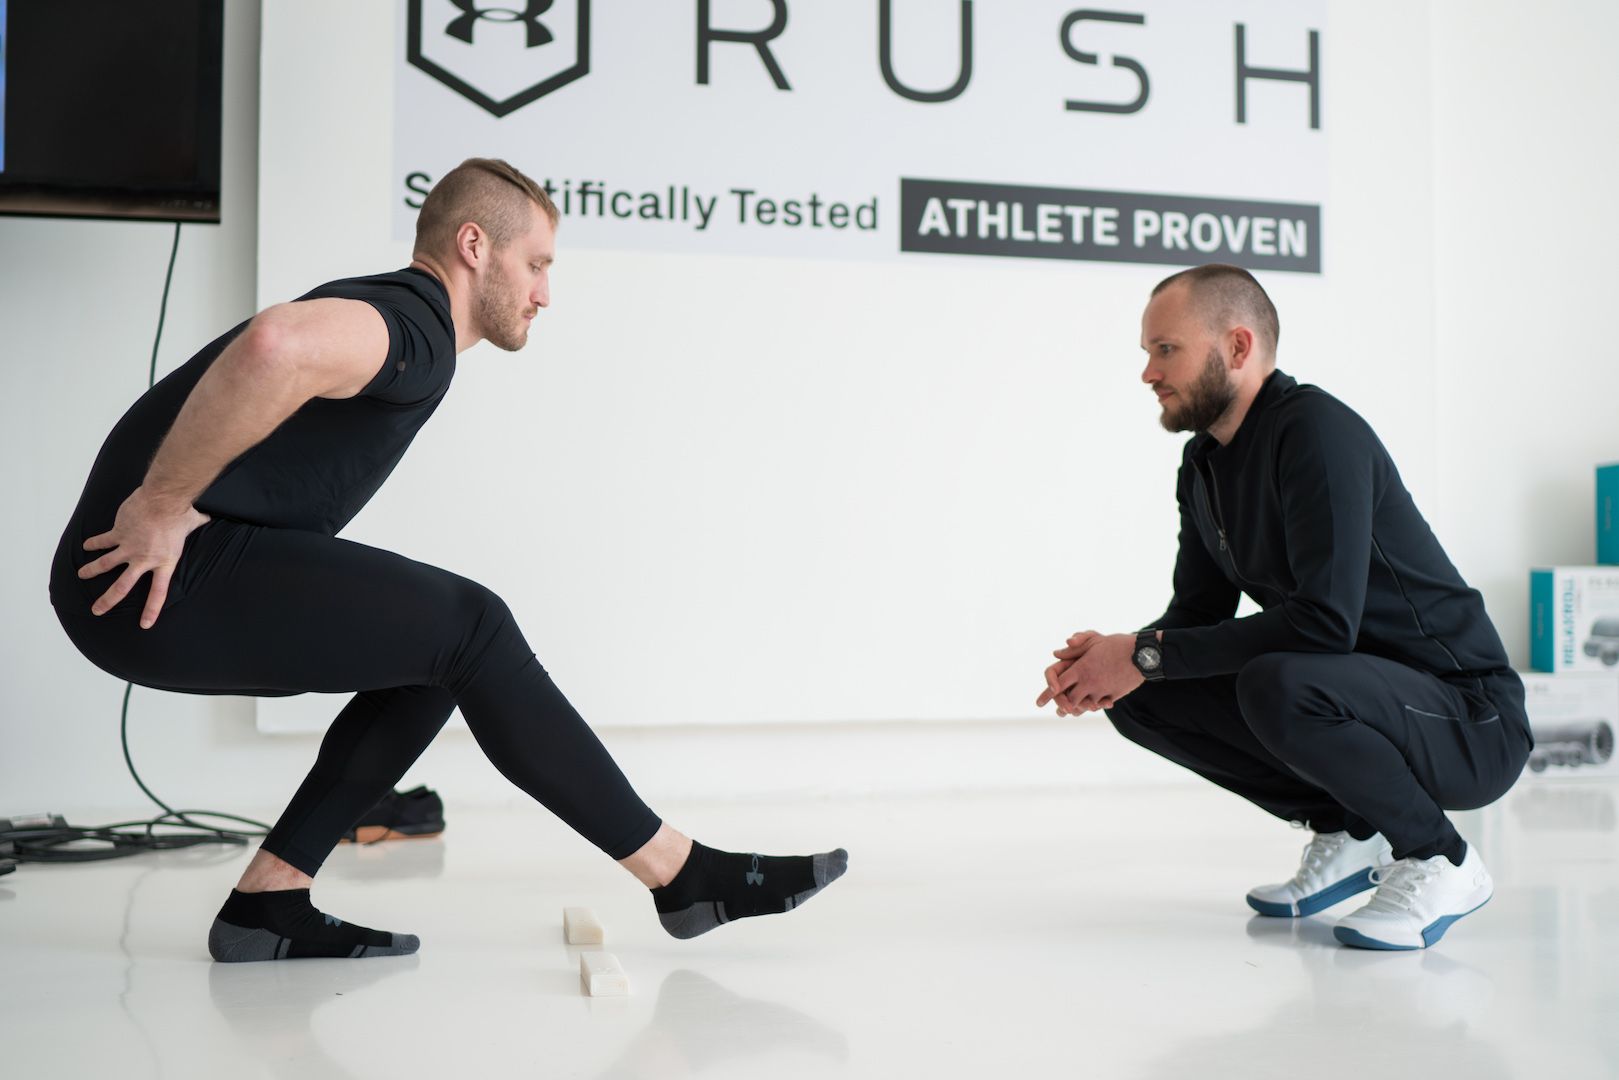 Darse prisa Europa Cubo Under Armour Rush Launch Experiment to Train Like a Pro Athlete